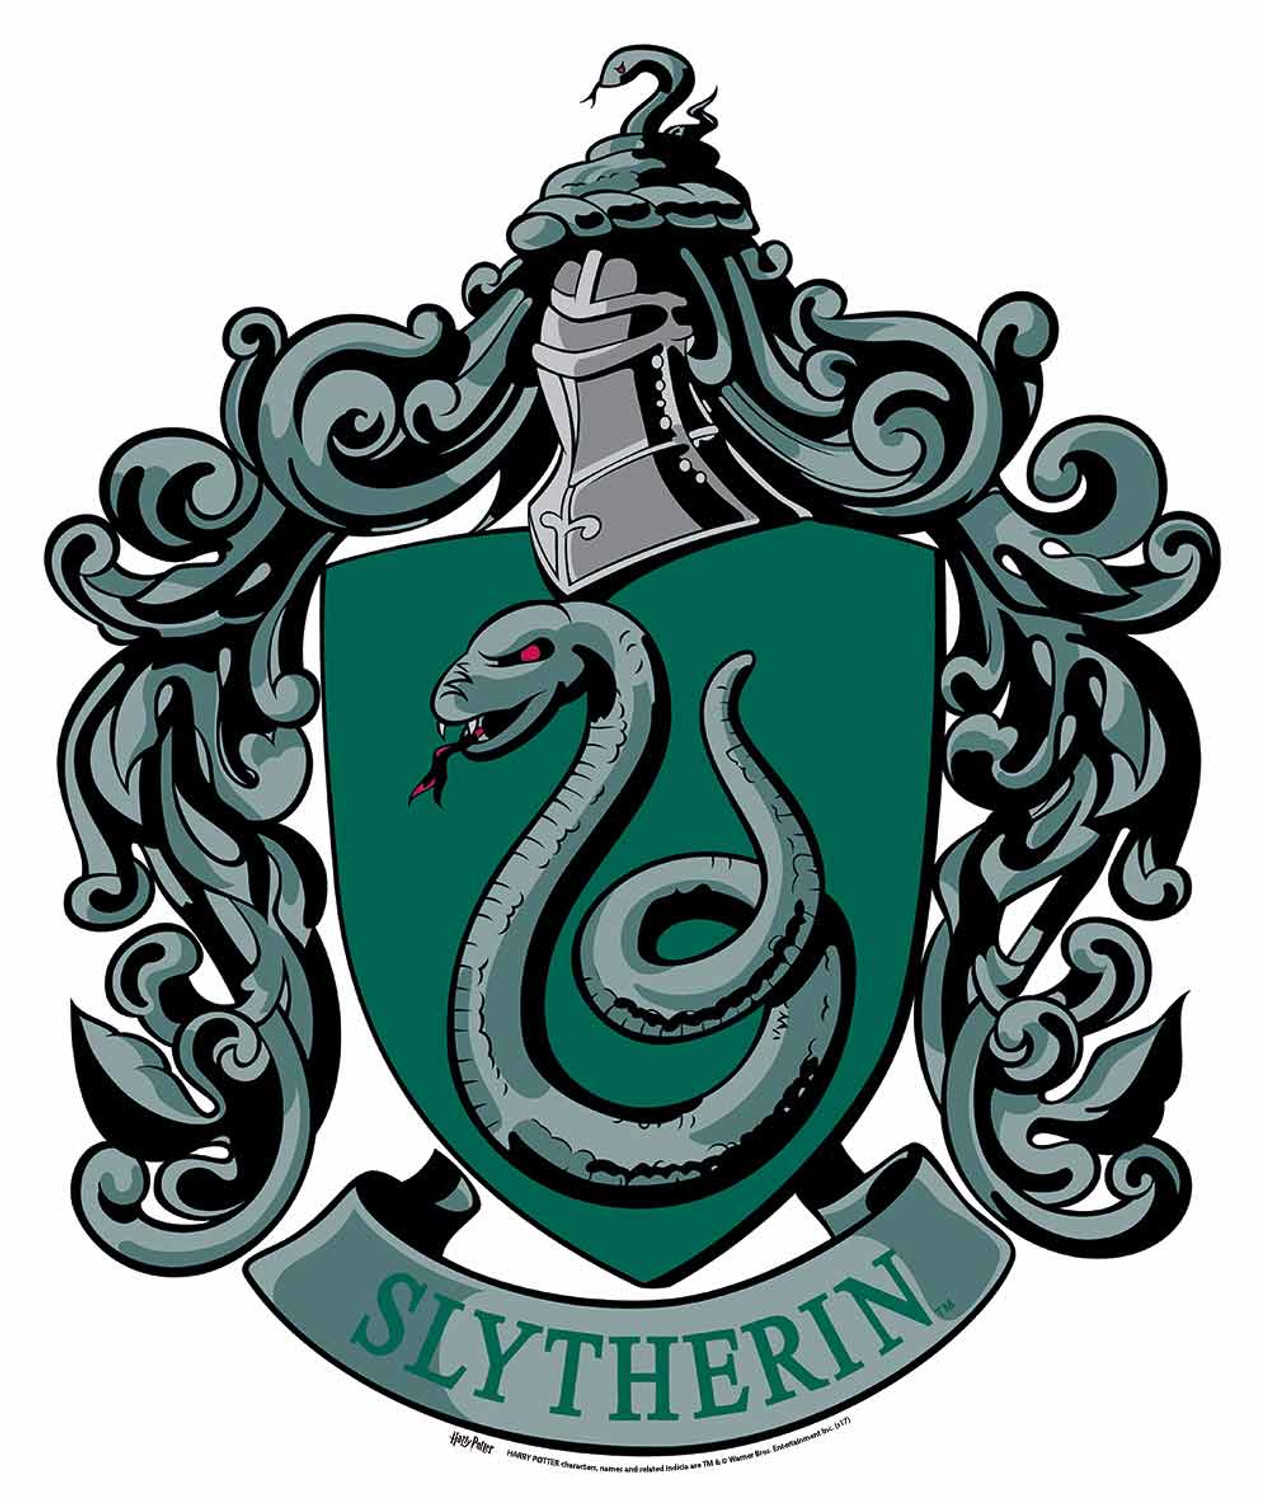 17 Gifts For Slytherins That Will Make Other Houses Turn Green